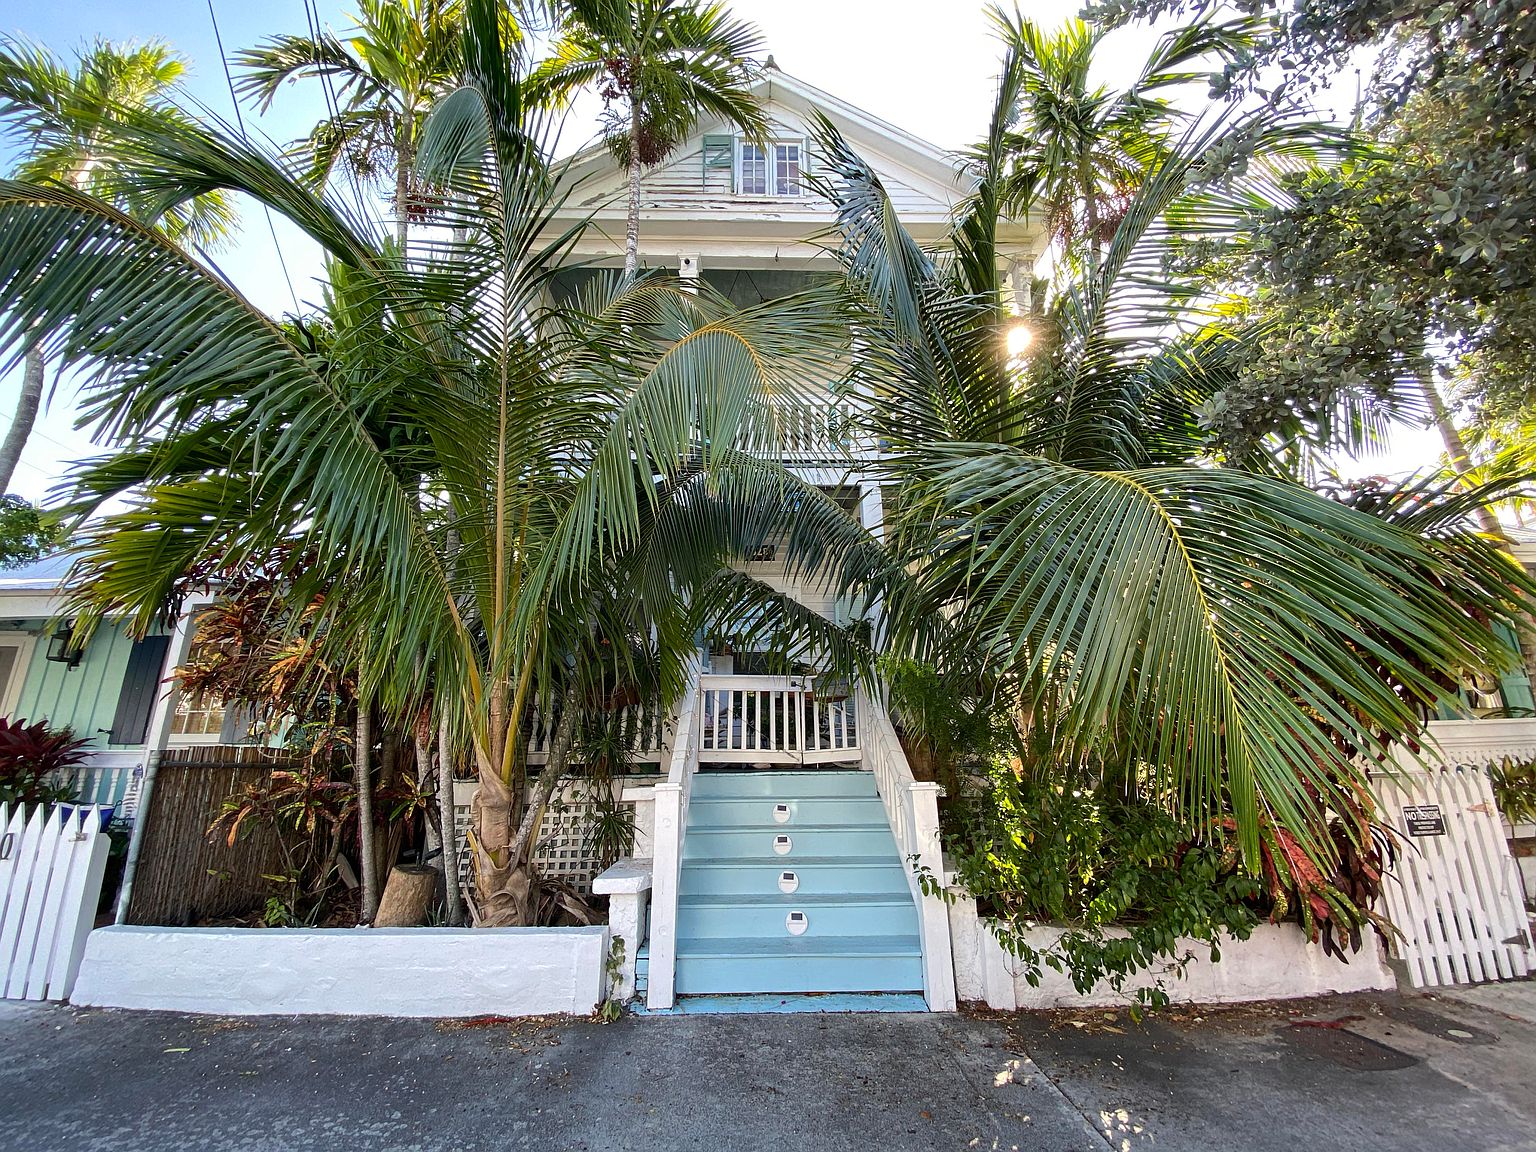 528 Grinnell St, Key West, FL 33040 | Zillow